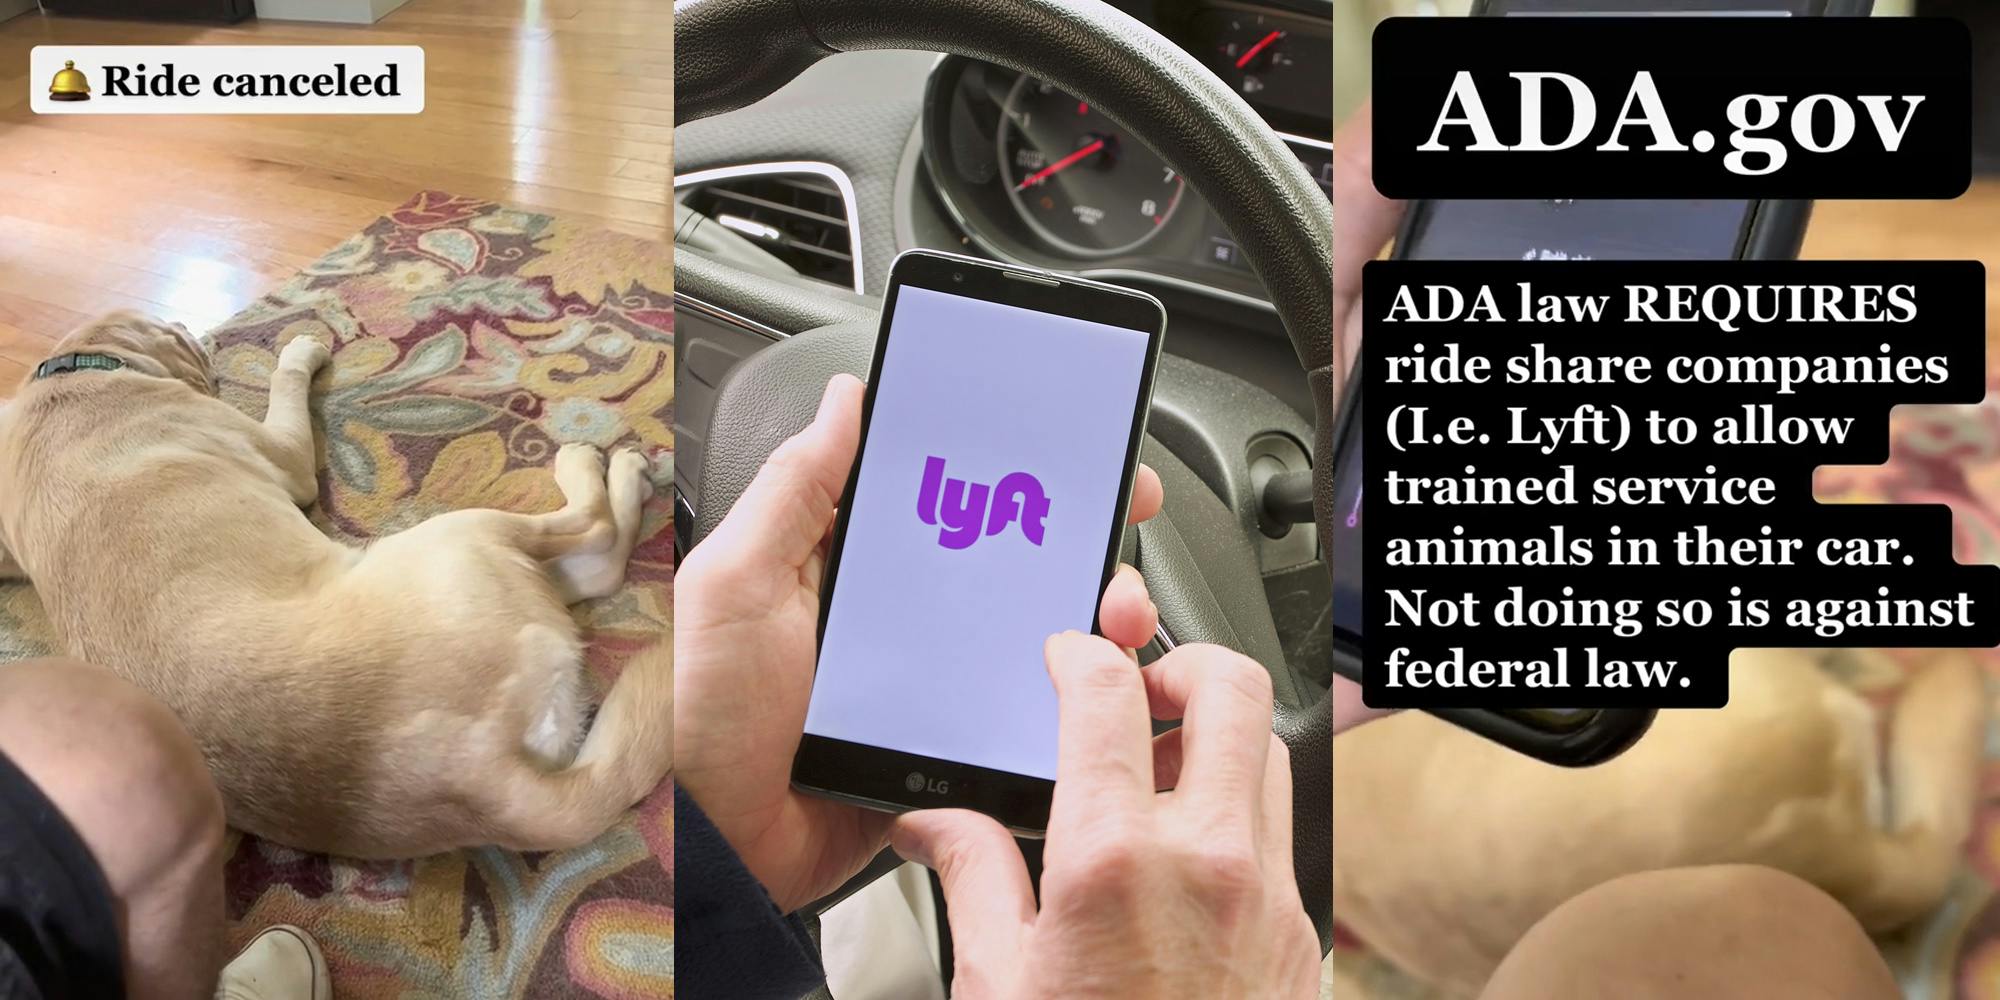 service dog sitting on rug owner on phone call caption "Ride canceled" (l) man hands holding phone in car with Lyft logo on screen (c) man phone caption "ADA.gov ADA law REQUIRES ride share companies (I.e Lyft) to allow trained service animals in their car. Not doing so is against federal law" (r)